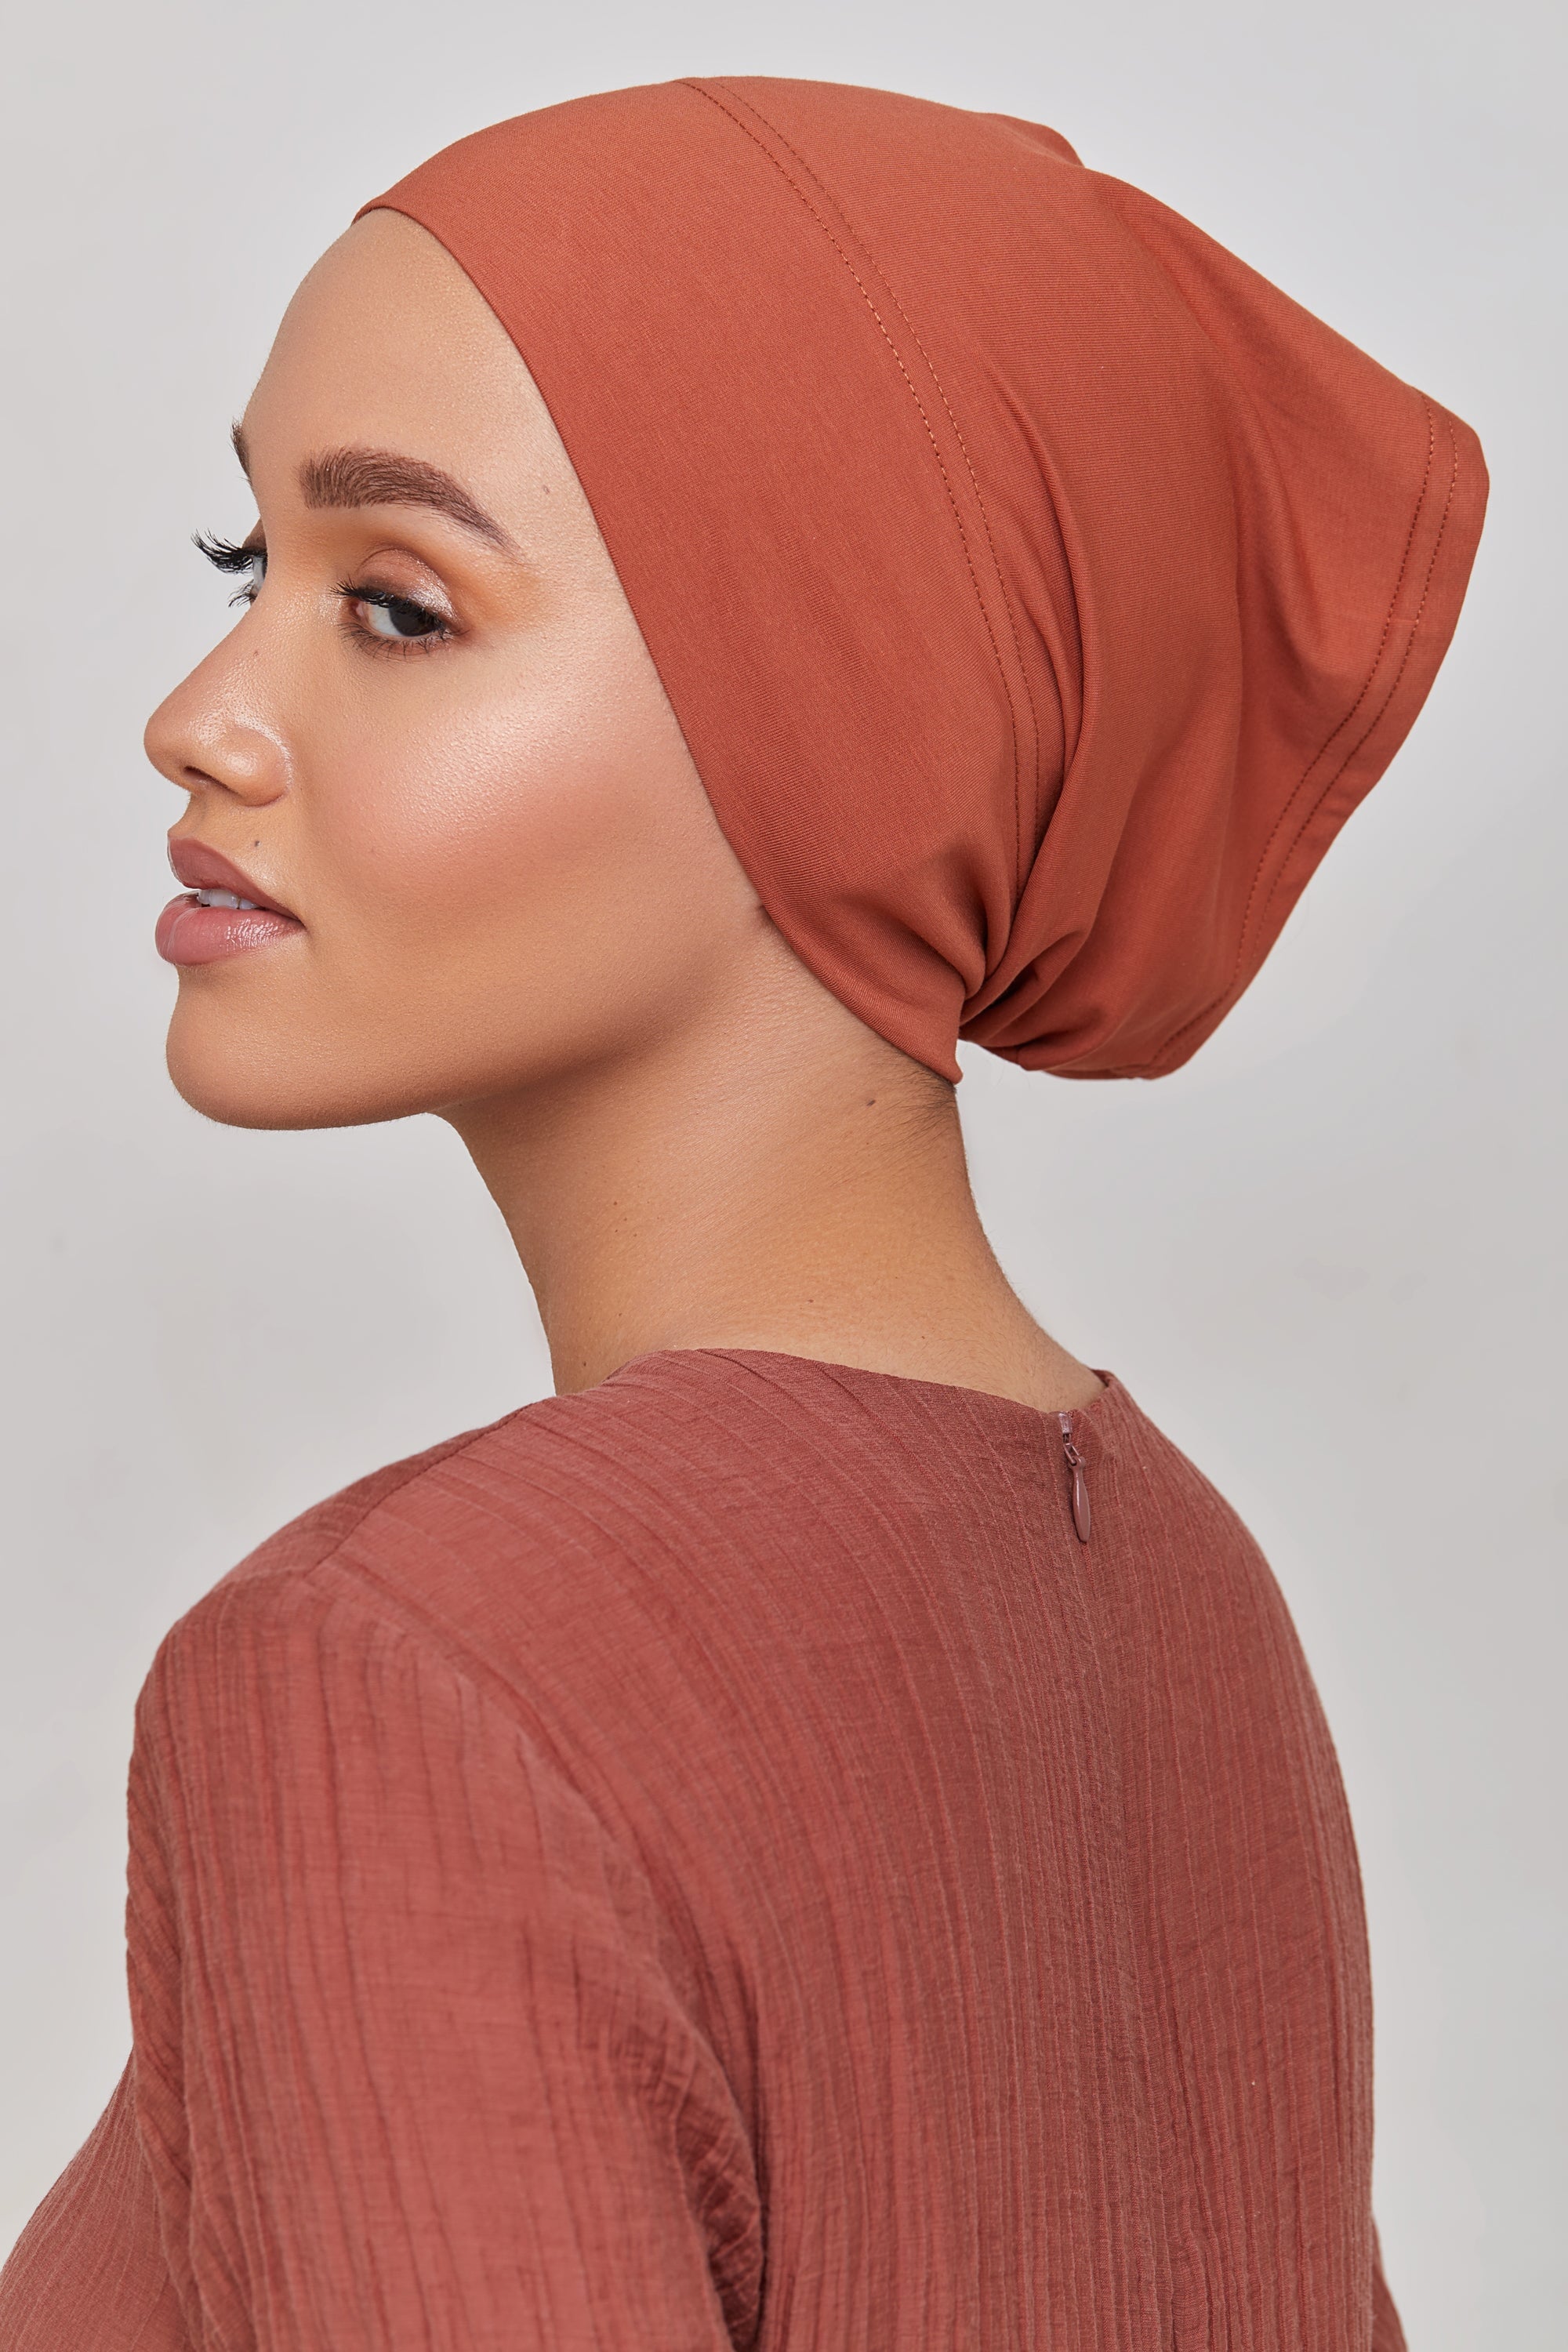 Cotton Undercap - Baked Clay Veiled Collection 